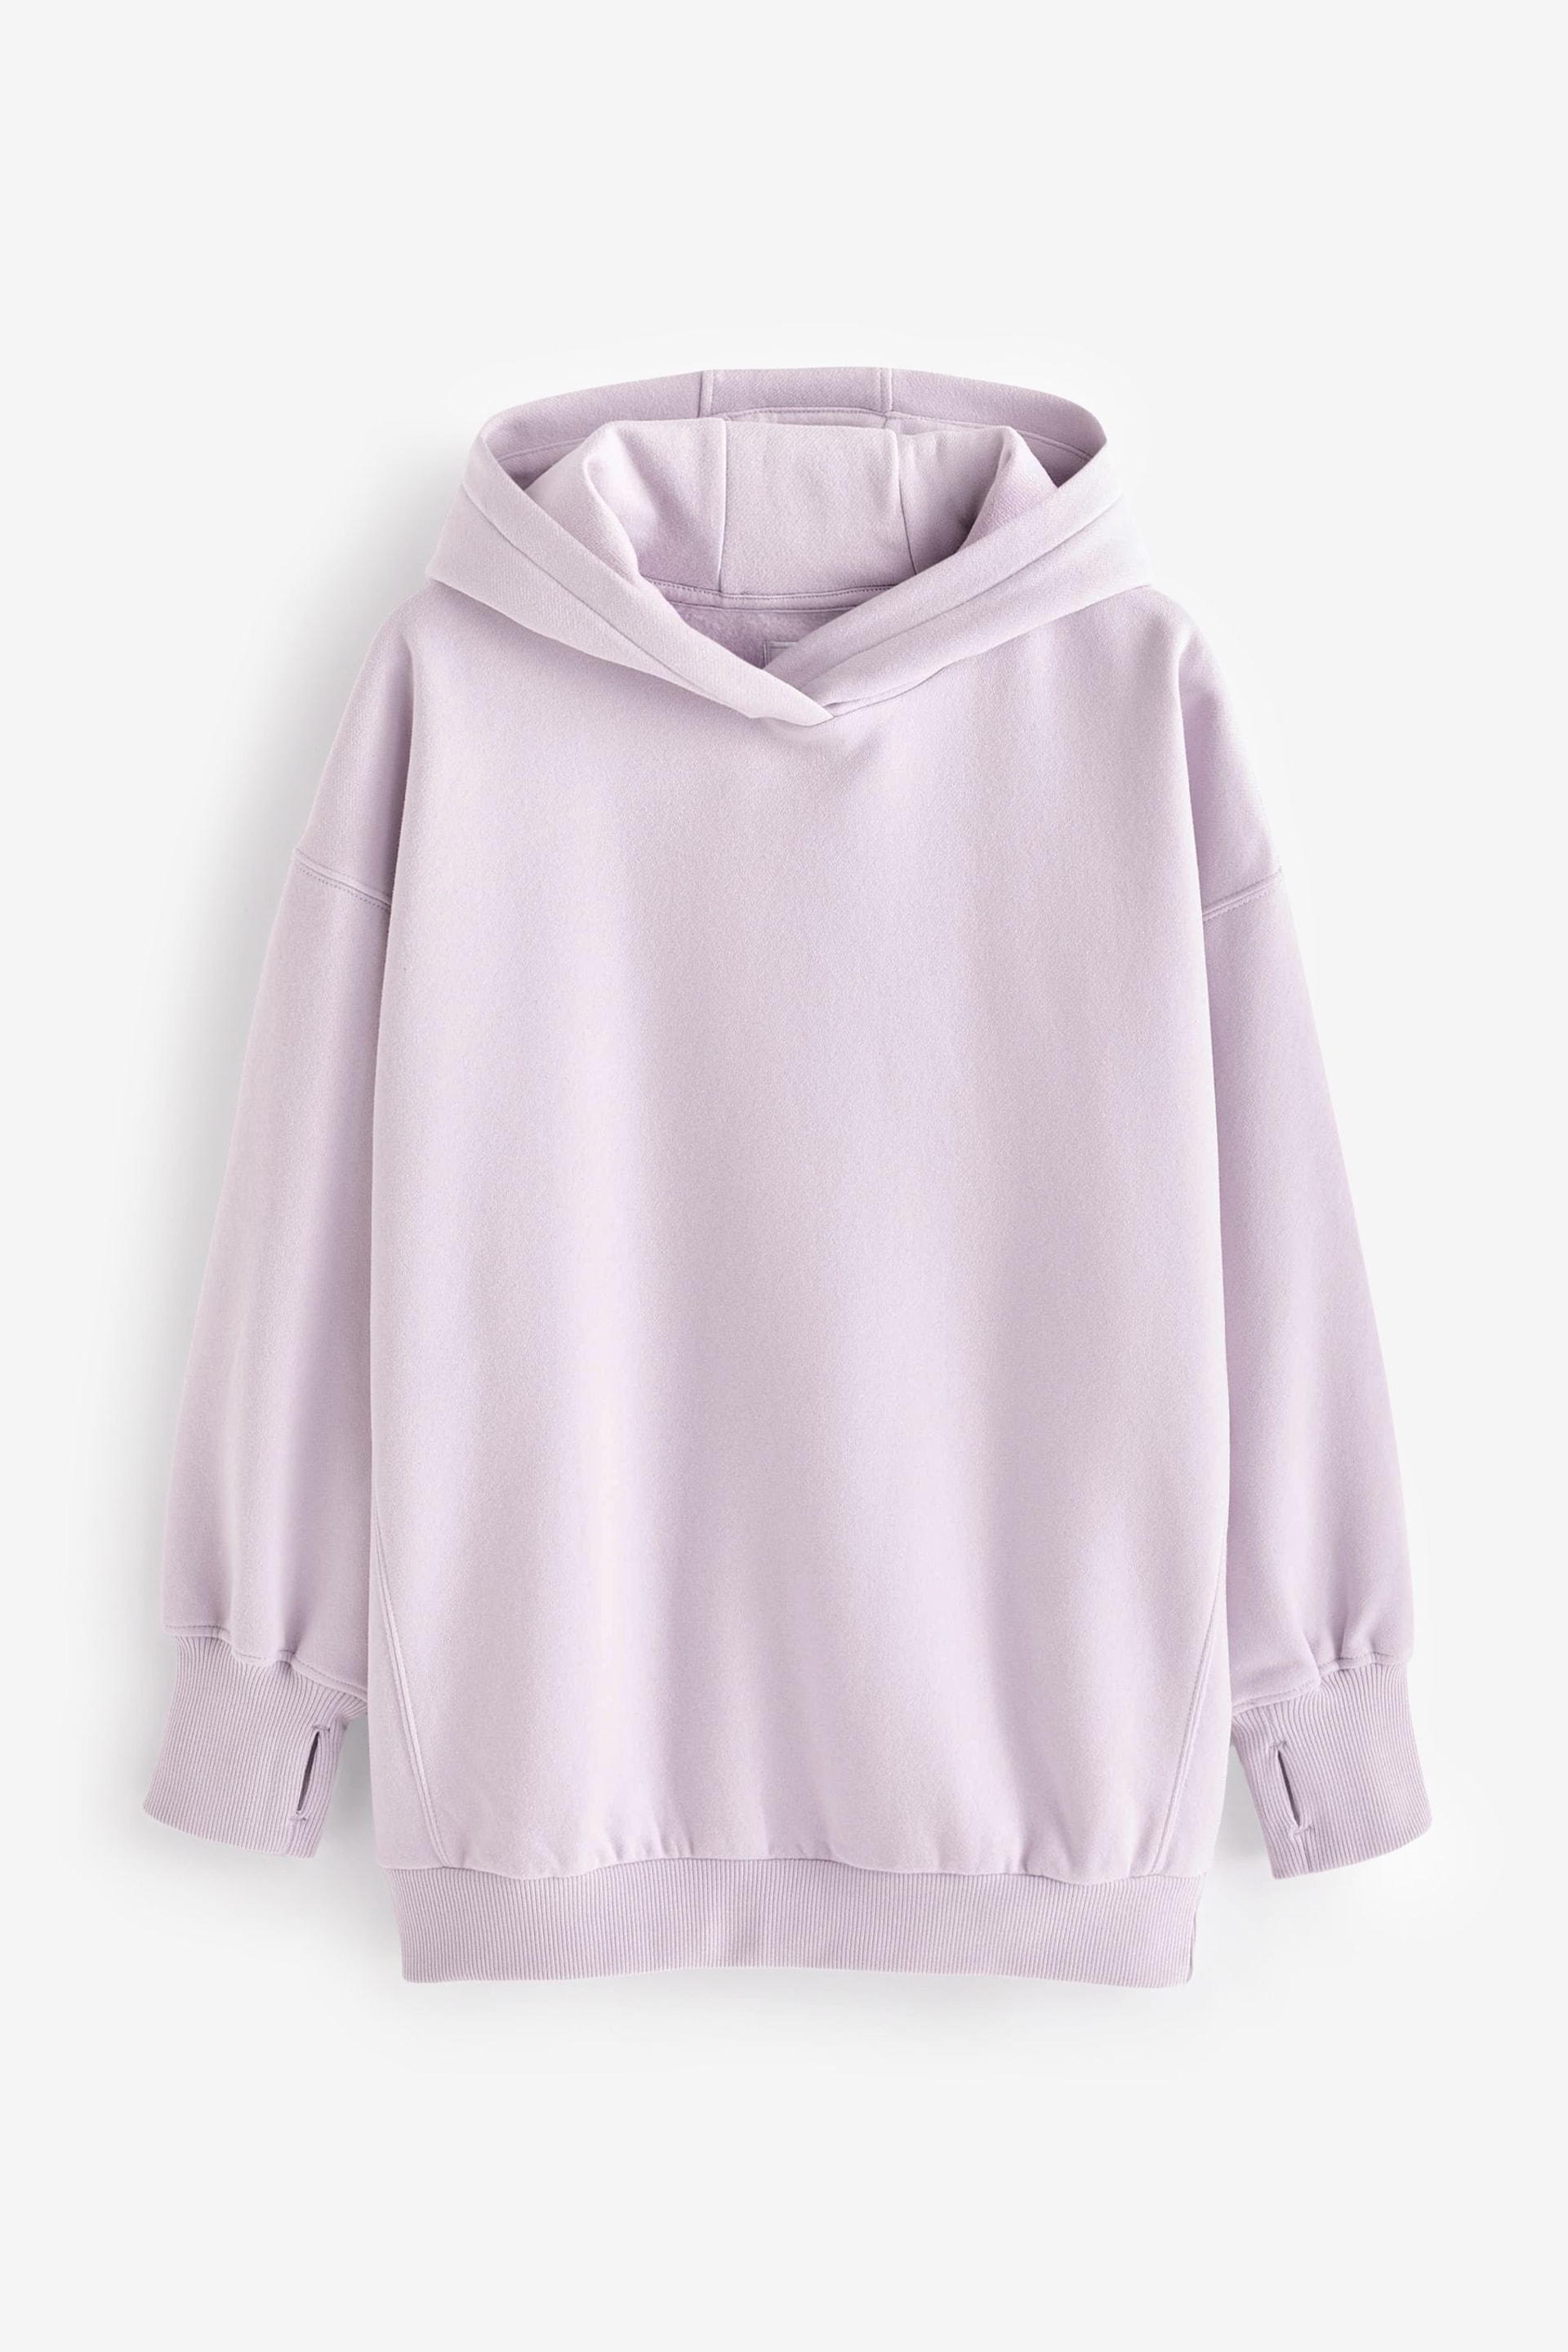 Lilac Purple Oversized Relaxed Fit Active Longline Overhead Hoodie - Image 2 of 4